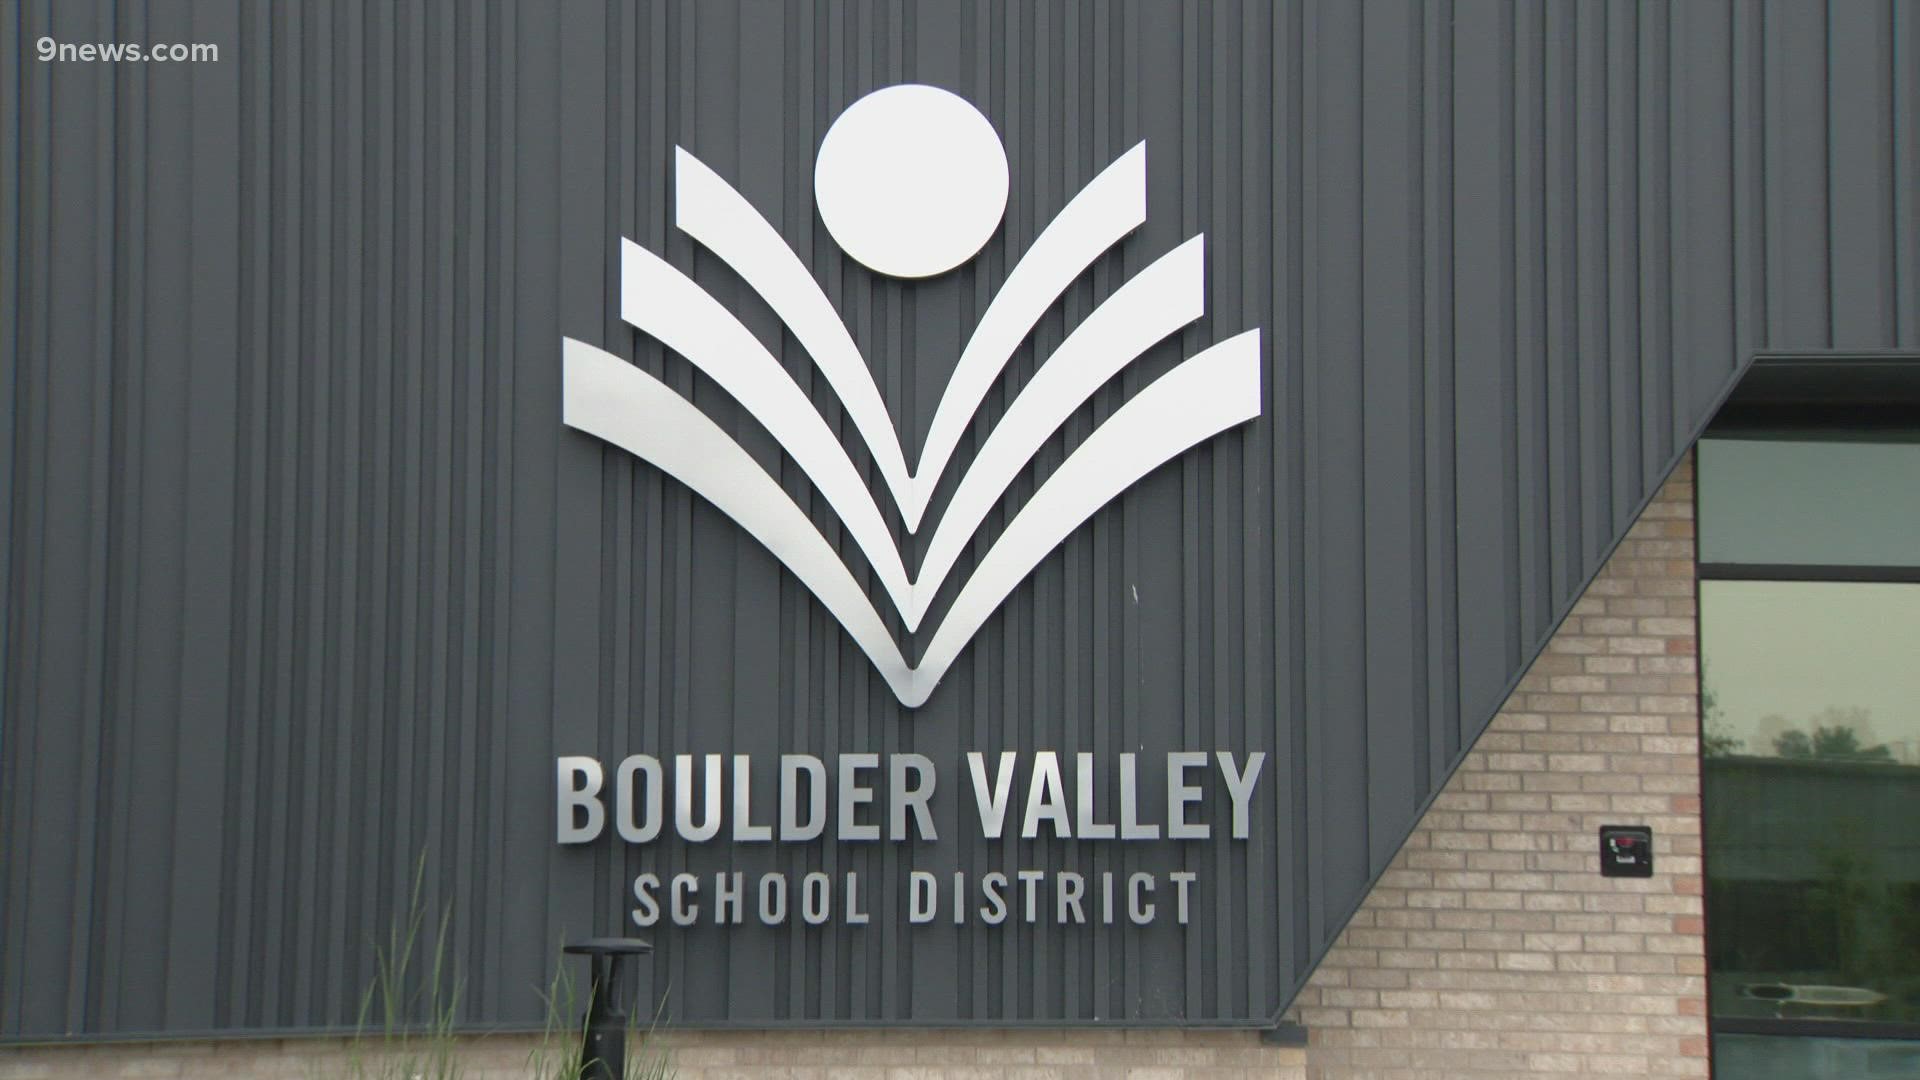 Board of health meets Monday while Boulder Valley Schools meets Tuesday to talk about what to do with masks and students in school.